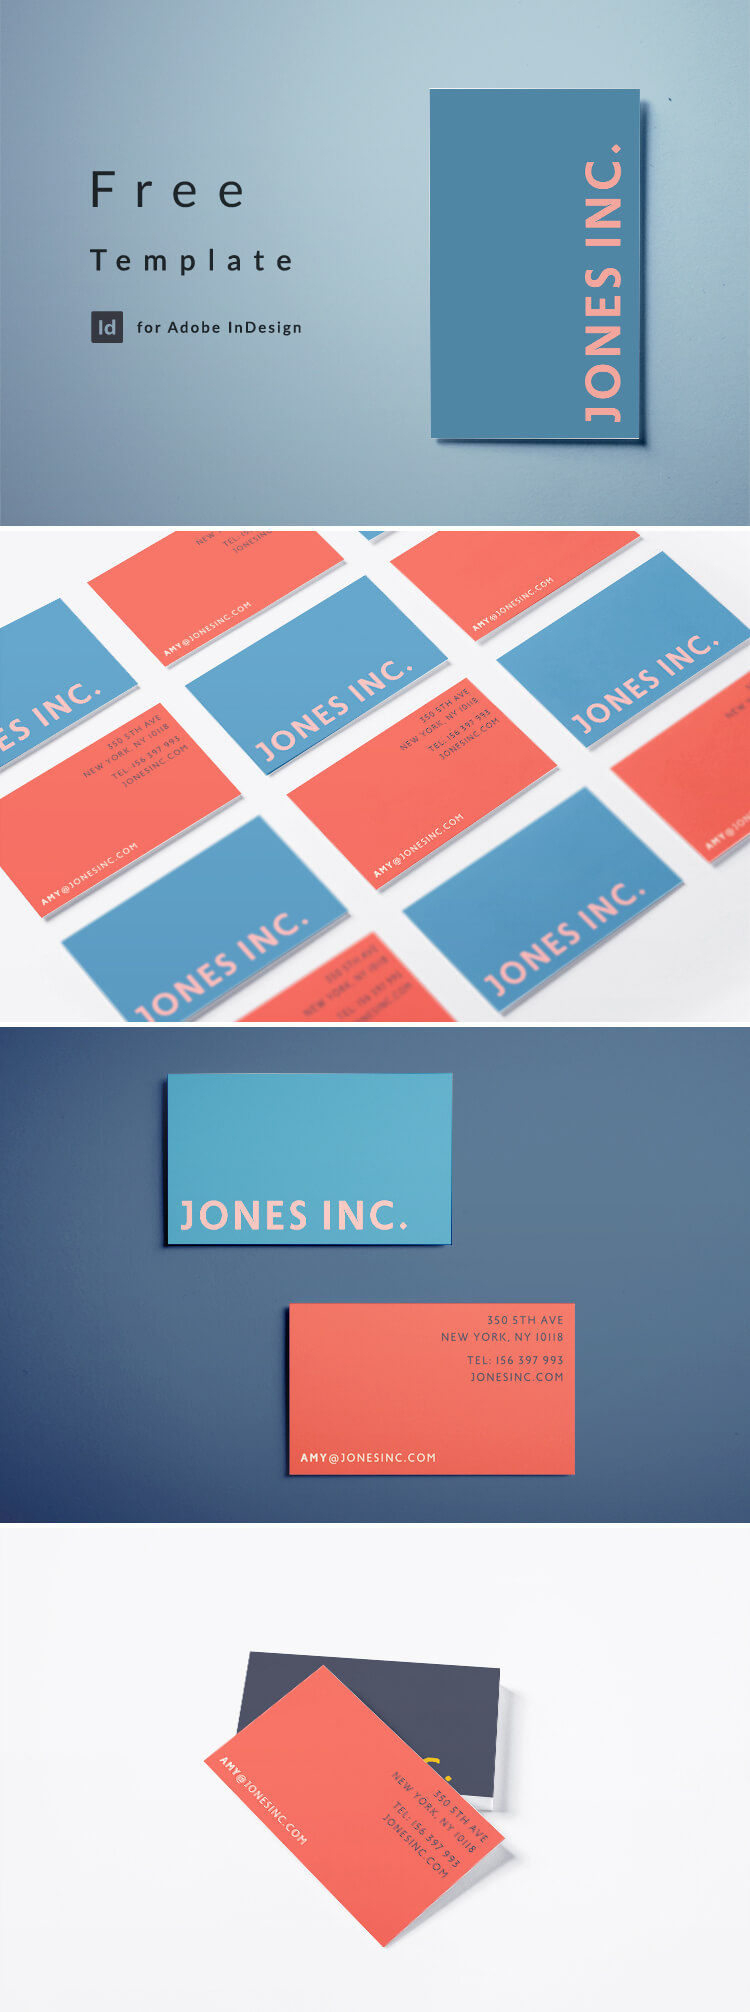 Free Business Card Template - Modern Minimal Business Card Design for InDesign